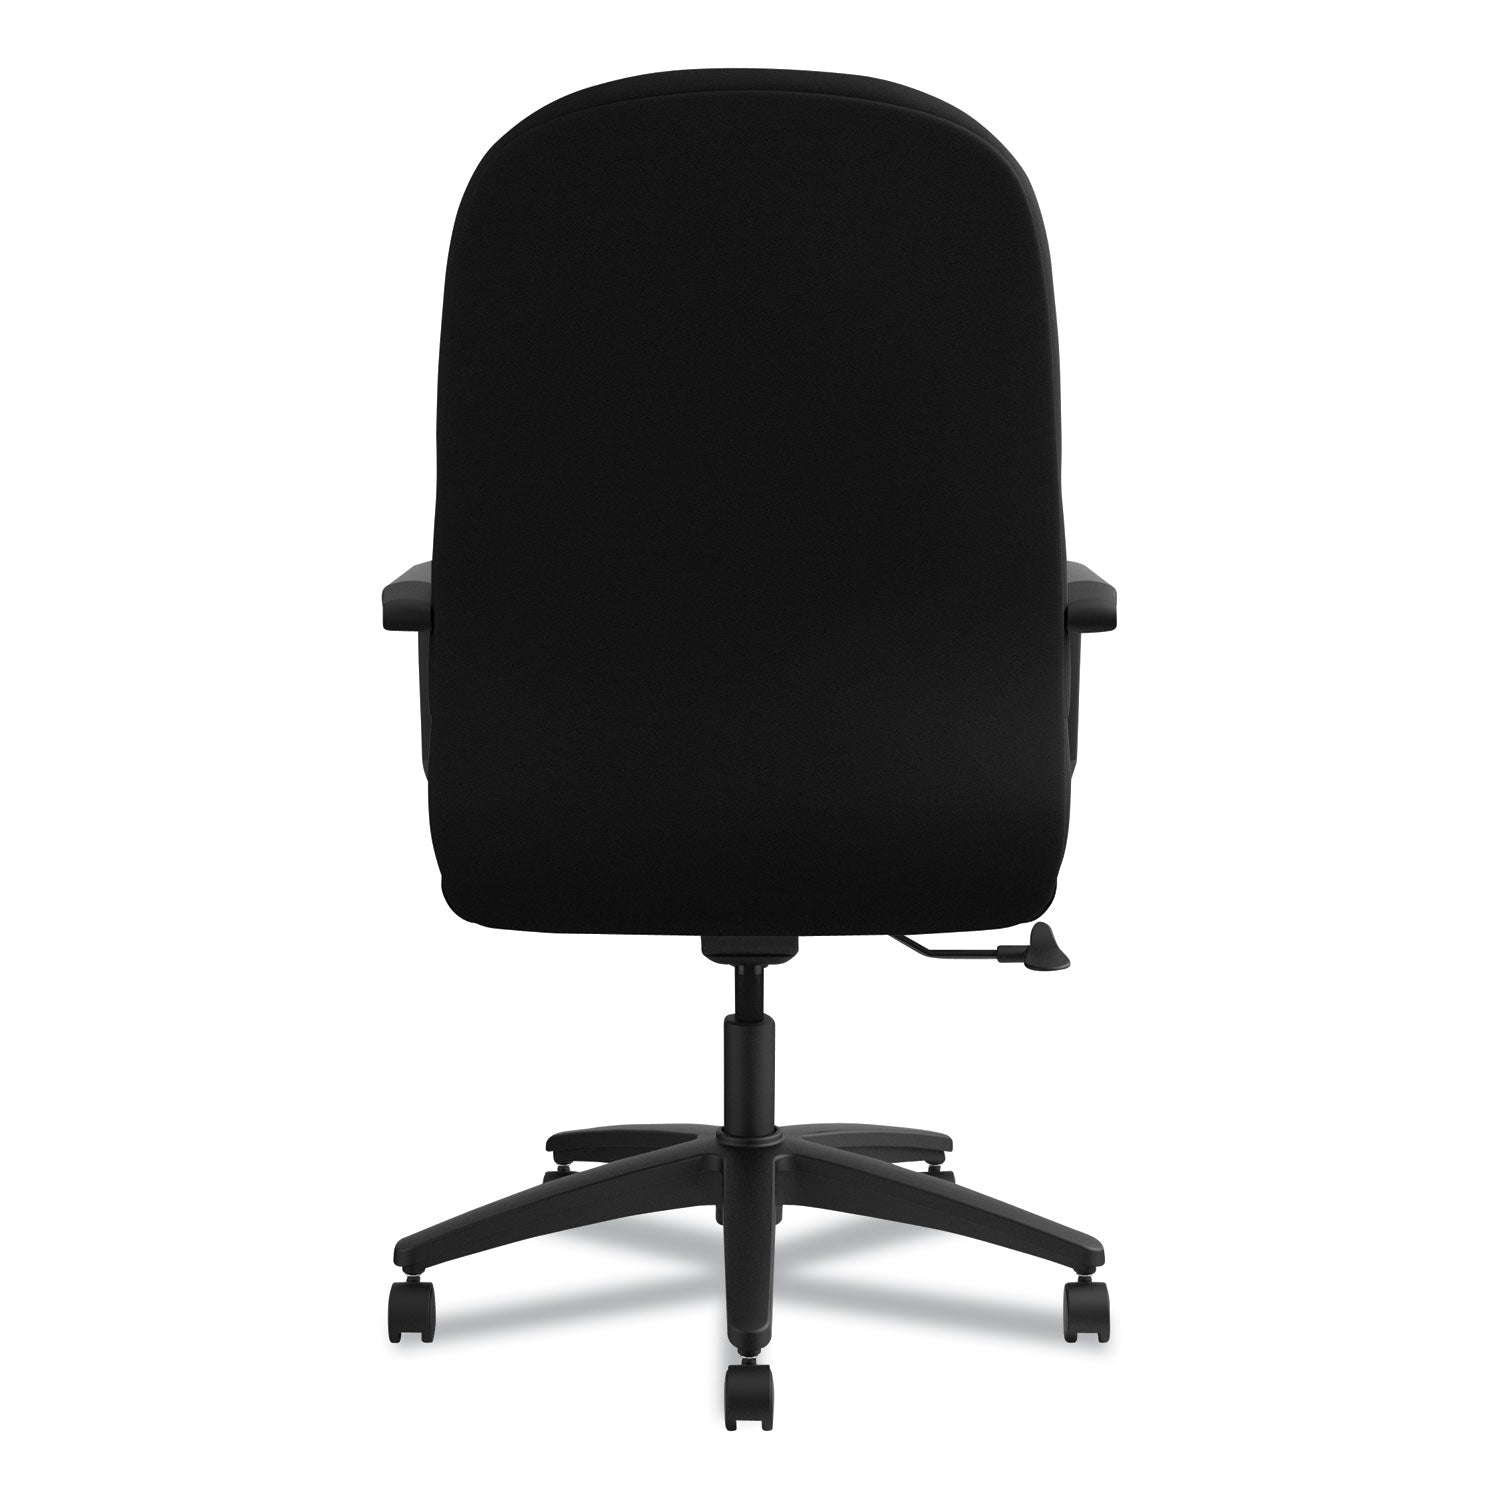 Pillow-Soft 2090 Series Executive High-Back Swivel/Tilt Chair, Supports Up to 300 lb, 17" to 21" Seat Height, Black - 7